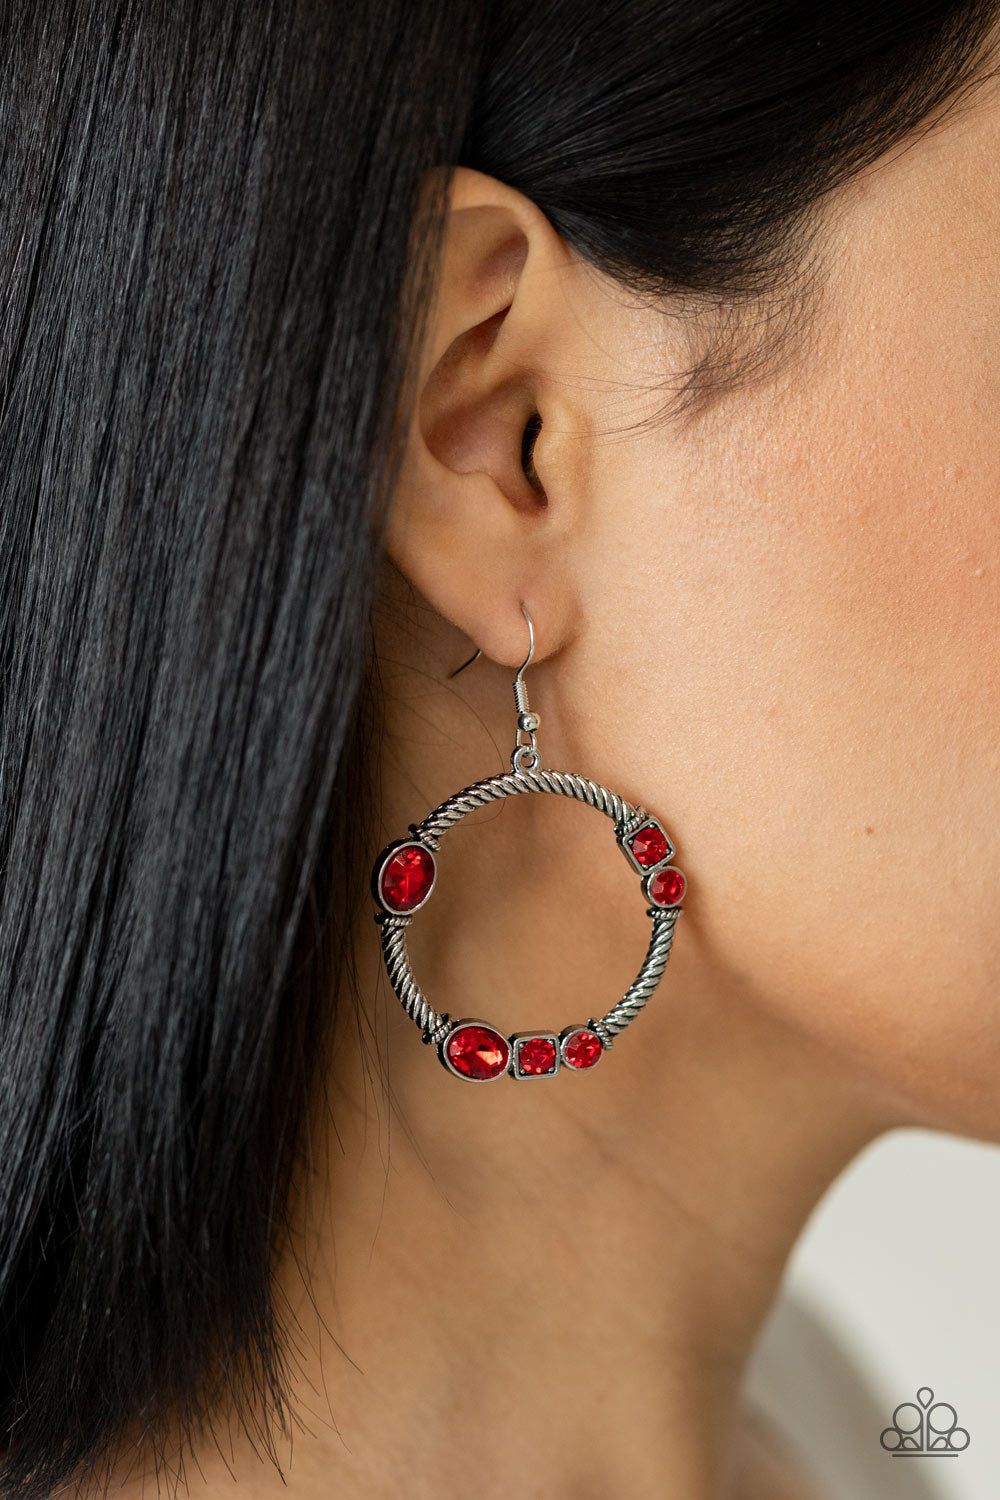 Glamorous Garland - Red and Silver Fashion Earrings - Paparazzi Accessories - Featuring round, oval, and square cuts, a collection of fiery red rhinestones haphazardly adorn the front of a textured silver hoop, for a gritty-glamorous unique earrings.